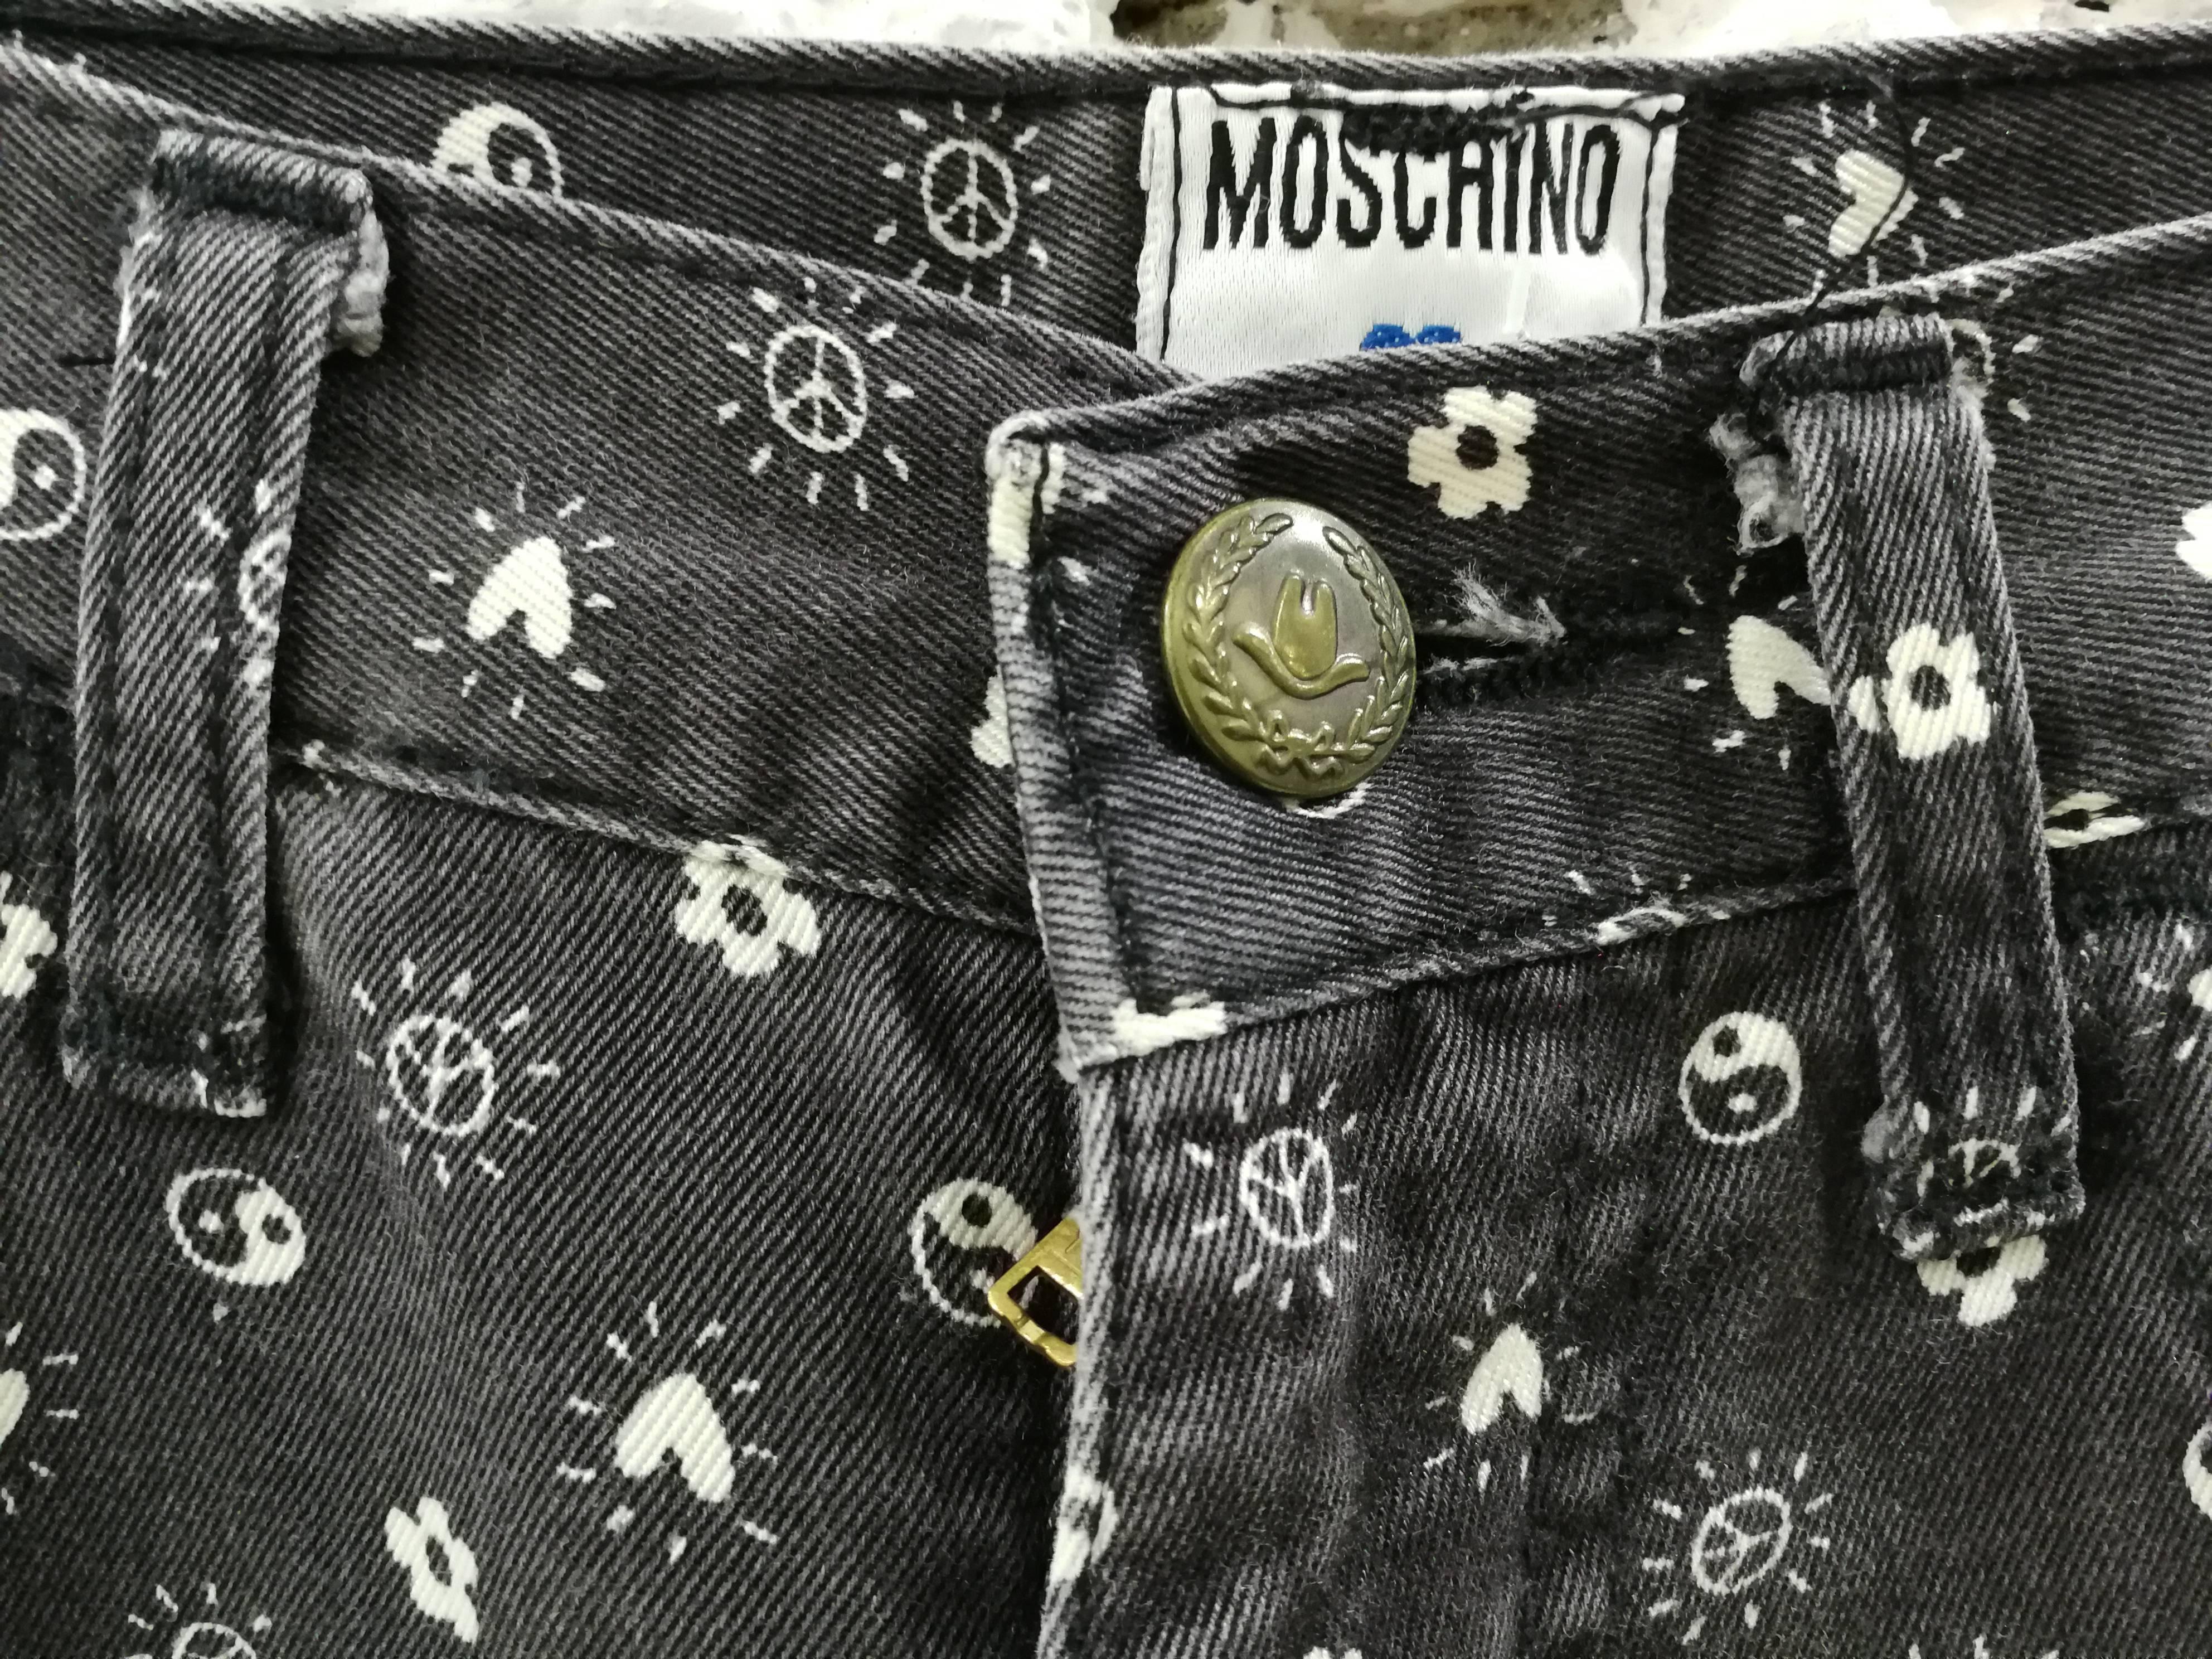 Moschino Jeans grey Trousers

Grey Moschino Jeans peace and more symbols all over

Totally made in italy in denim size 27

Composition: cotton